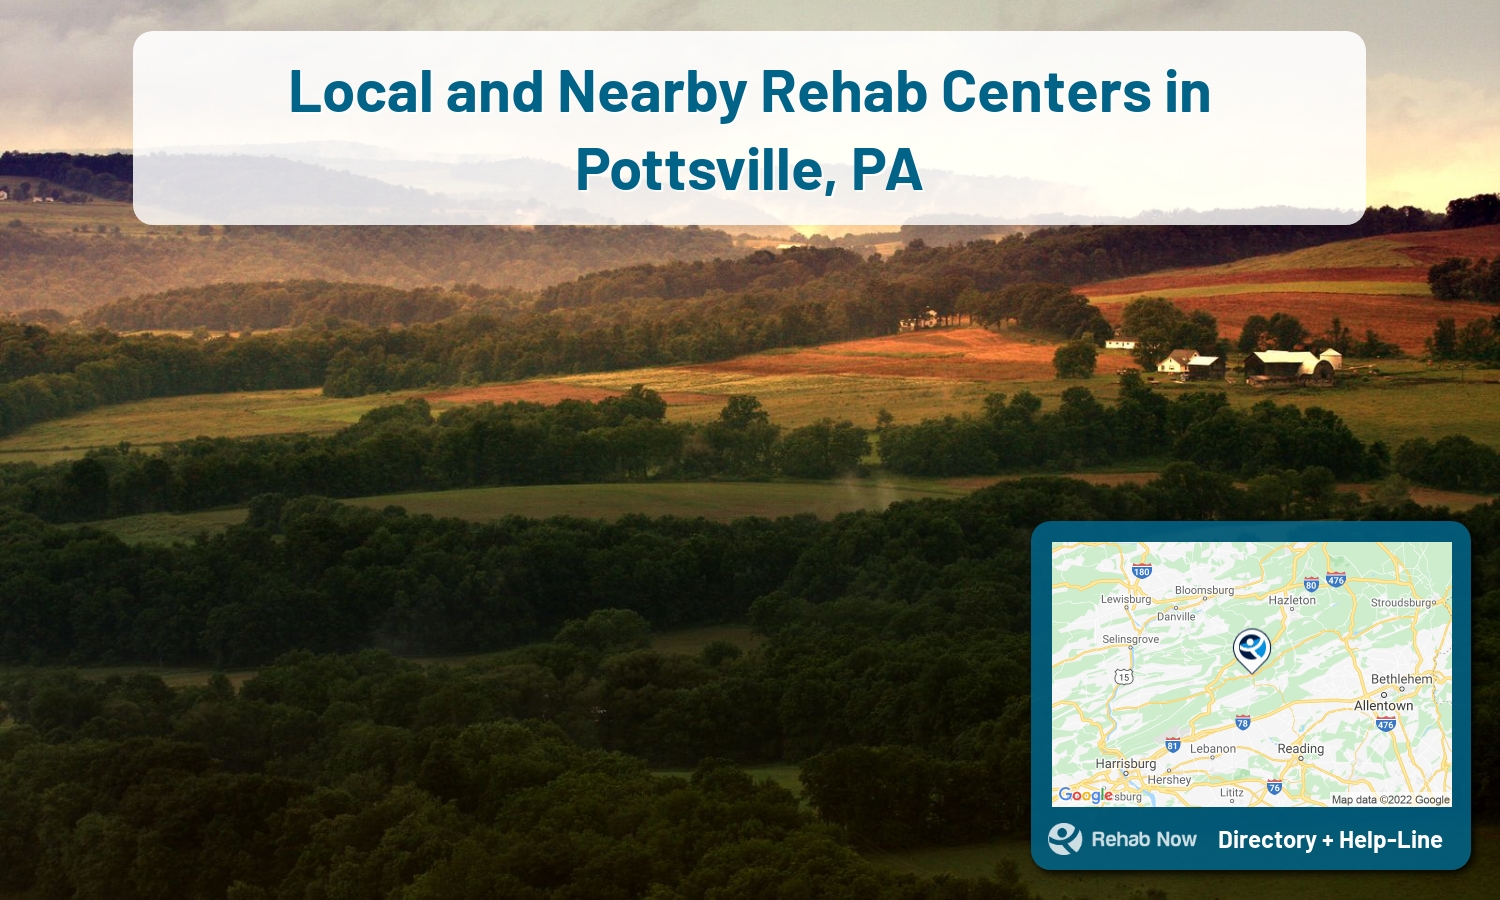 Those struggling with addiction can find help through addiction rehab facilities in Pottsville, PA. Get help now!